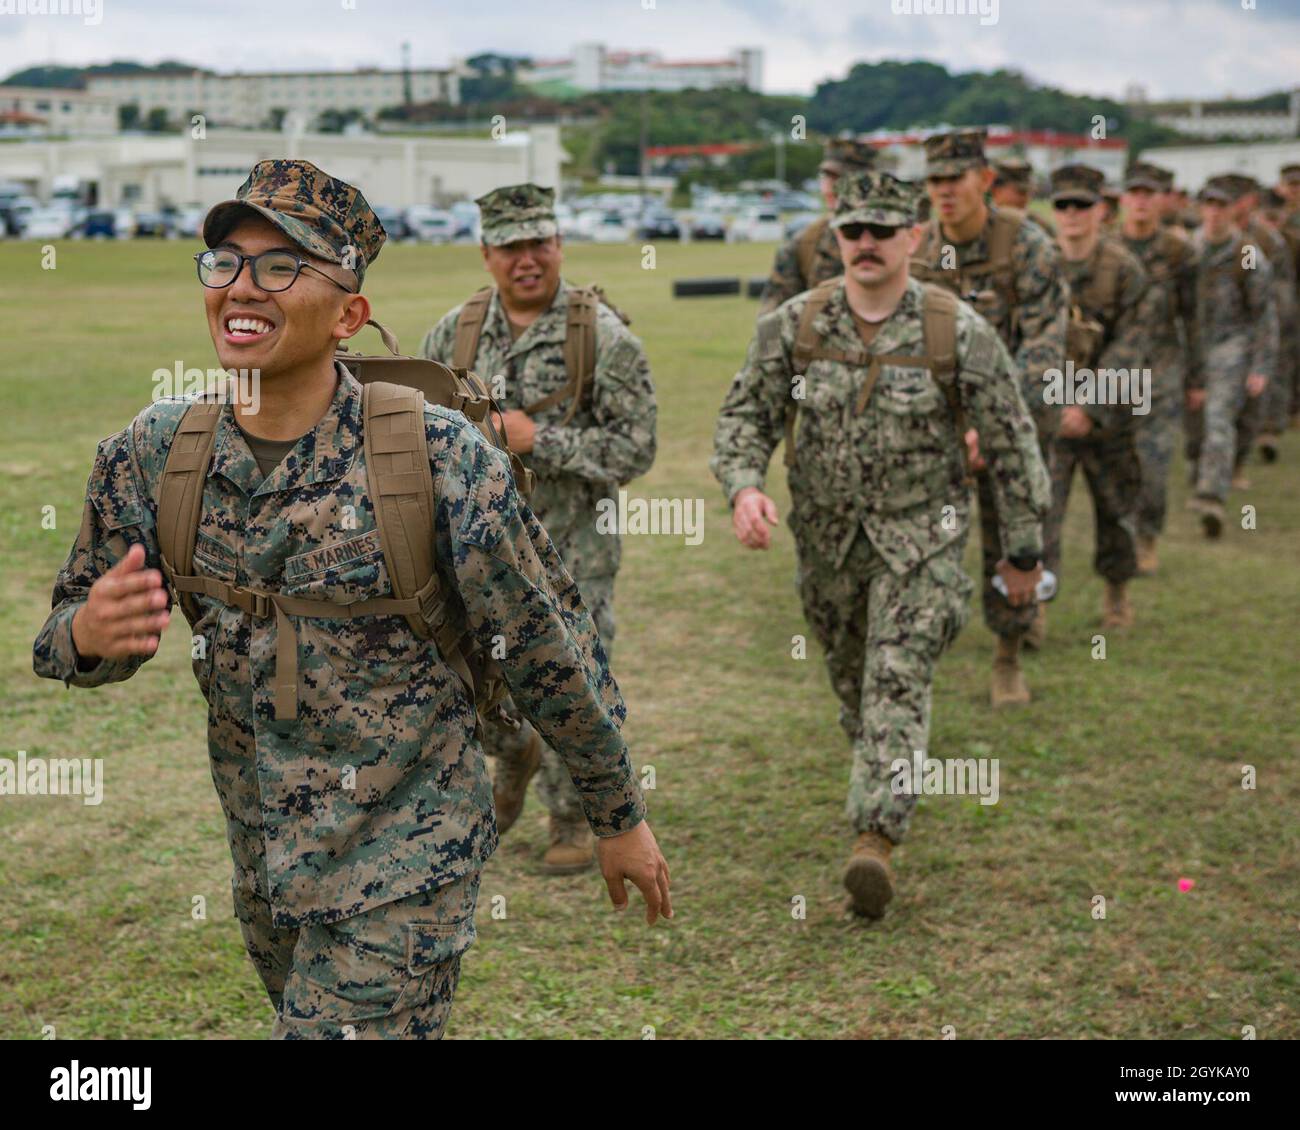 U.S. Marine Corps Cpl. Christian Hago, a network administrator with Headquarters and Support Battalion, Marine Corps Installations Pacific, participates in a hike in honor of Martin Luther King Jr. hike around Camp Foster, Okinawa, Japan on Jan. 16, 2019. The purpose of the hike was to commemorate Dr. King's life and his struggle to combat racial inequality through nonviolent resistance and civil disobedience. (U.S. Marine Corps photo by Cpl. Christopher A. Madero) Stock Photo